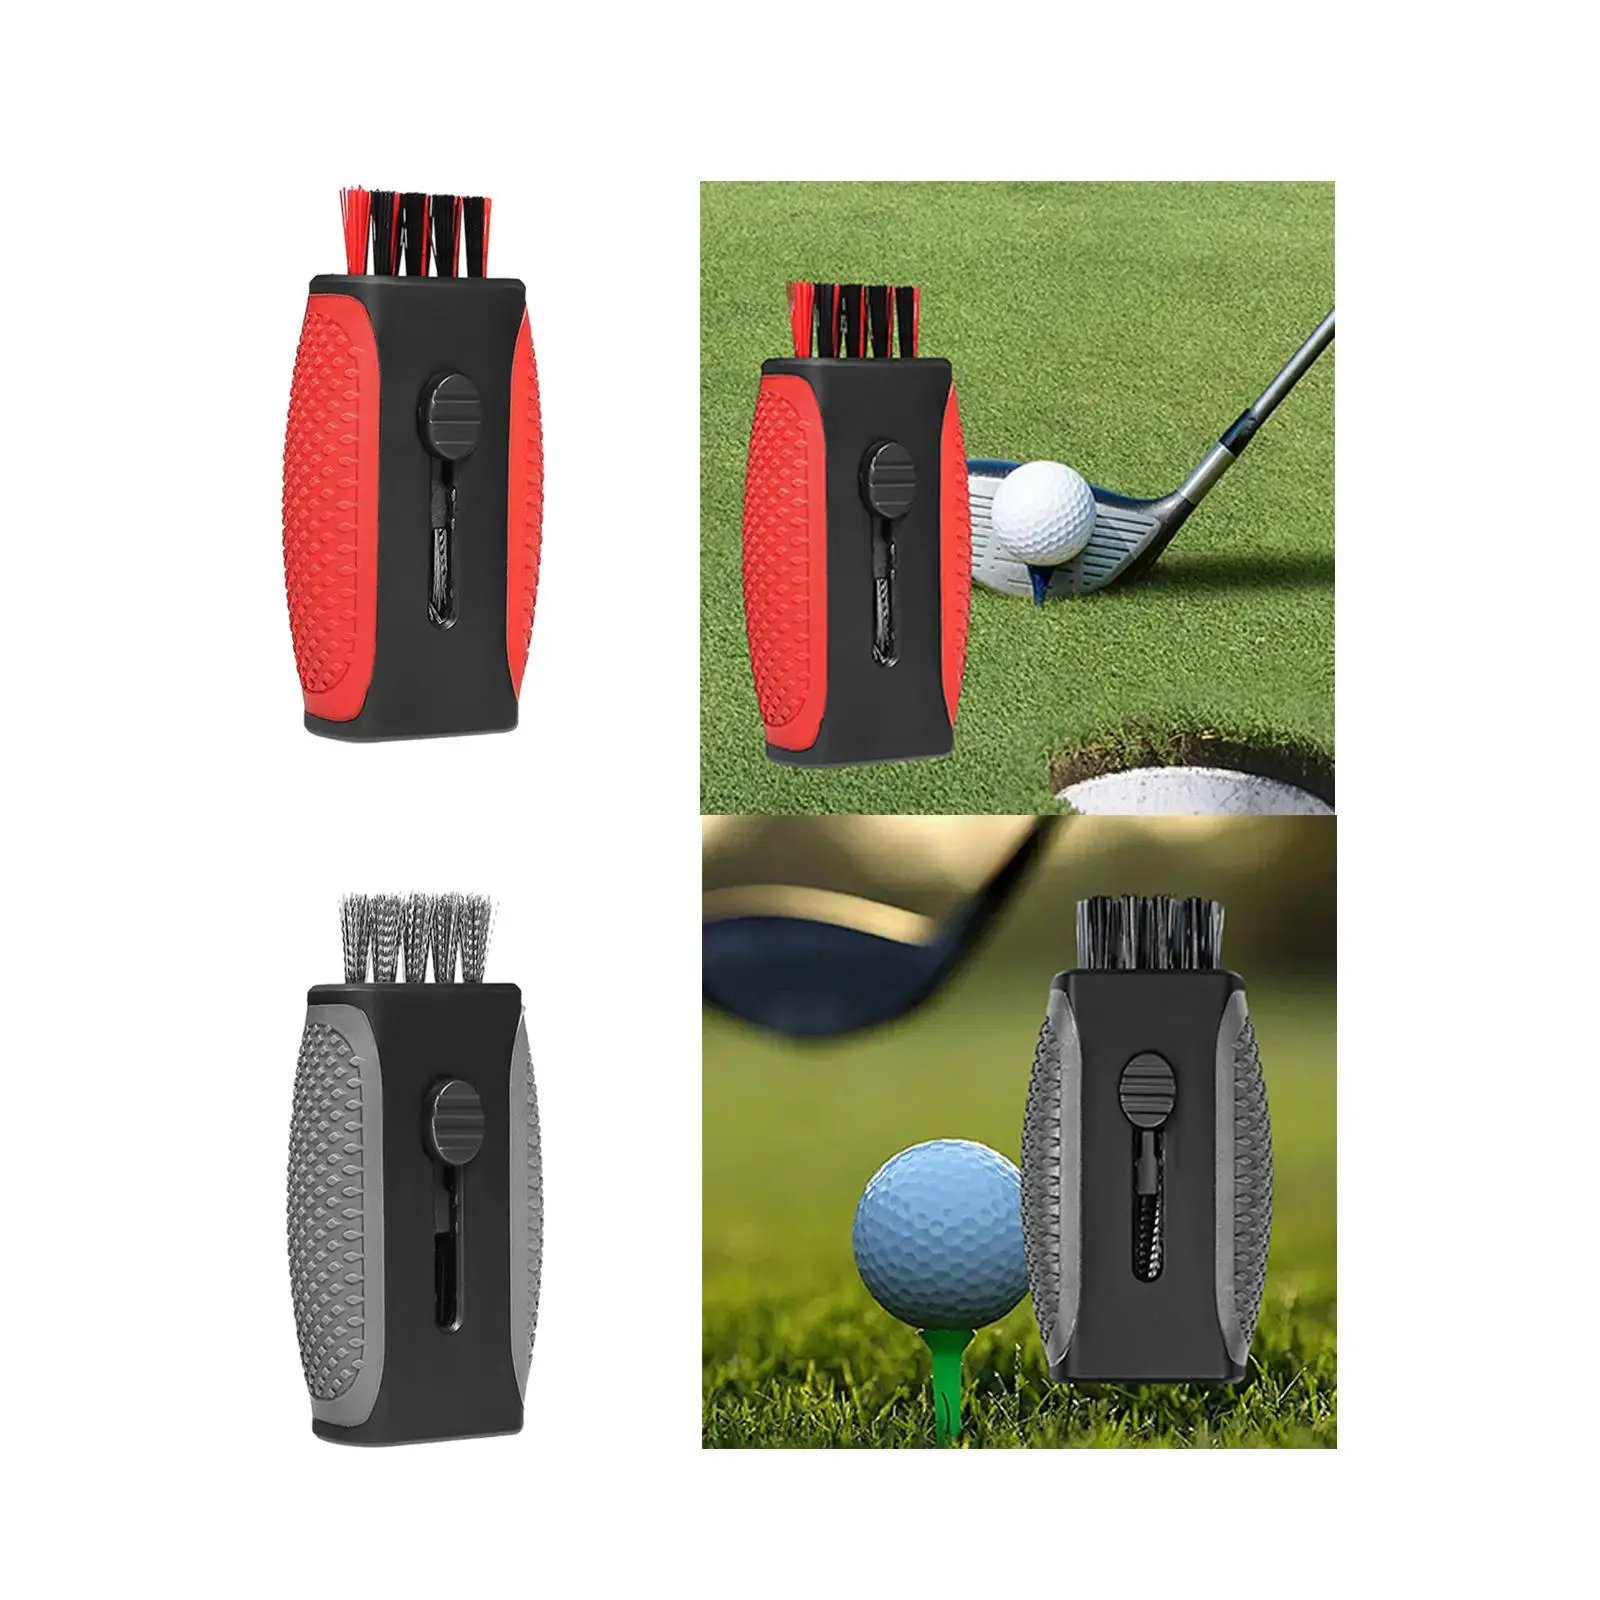 Golf Club Brush, Retractable Golf Club Cleaning Brush Tool, Golfing Cleaning